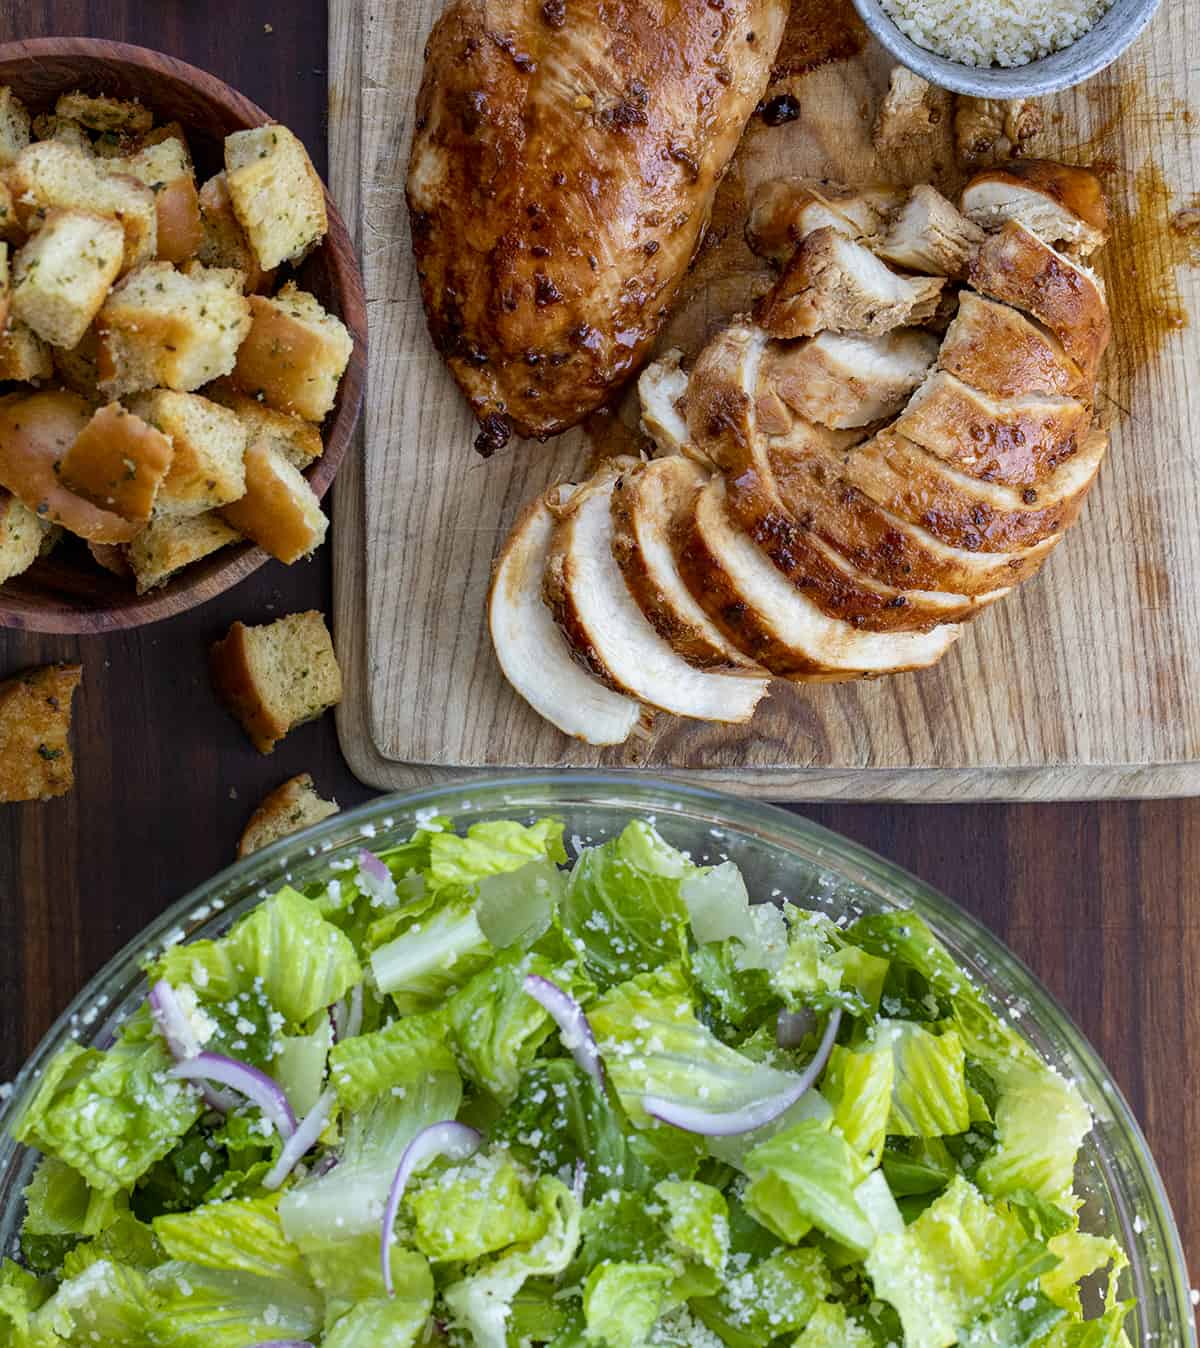 Sliced Chicken, Homemade Croutons, and Lettuce with Onions before Assembling to Make Lemon Parmesan Chicken Salad. Salad, Summer Salad, Viral Salad, TikTok Viral Salad, Tiktok Salad, Lemon Salad, Lemon Garlic Salad, Summer Meals, Dinner, Lunch, i am homesteader, iamhomesteader.